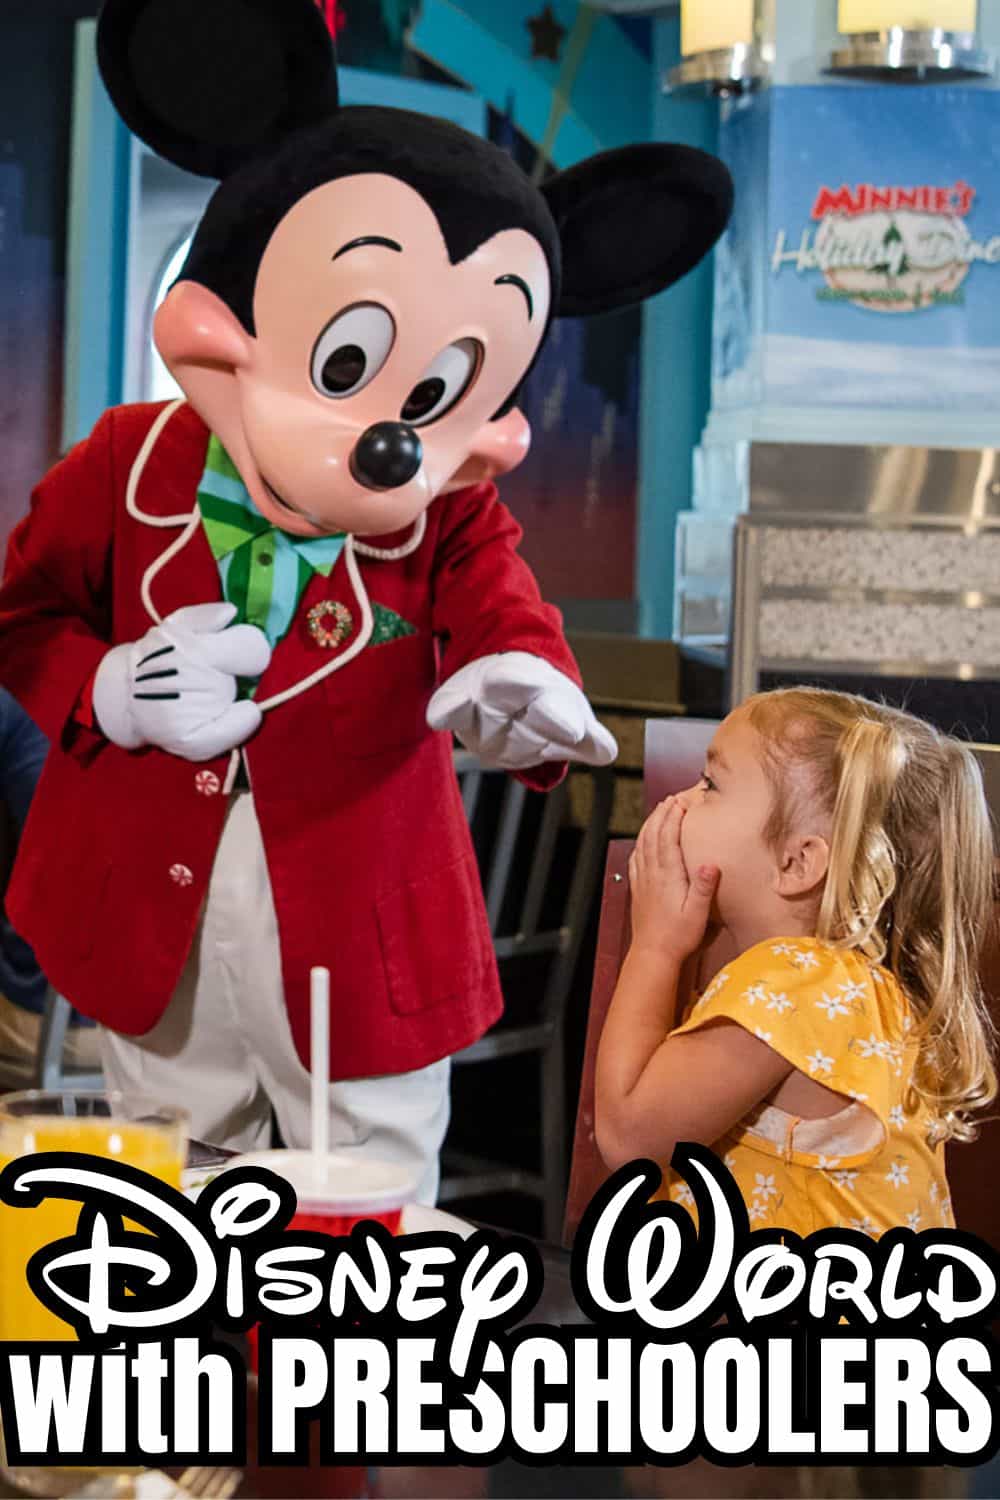 10 Tips for Going to Disney with Preschoolers